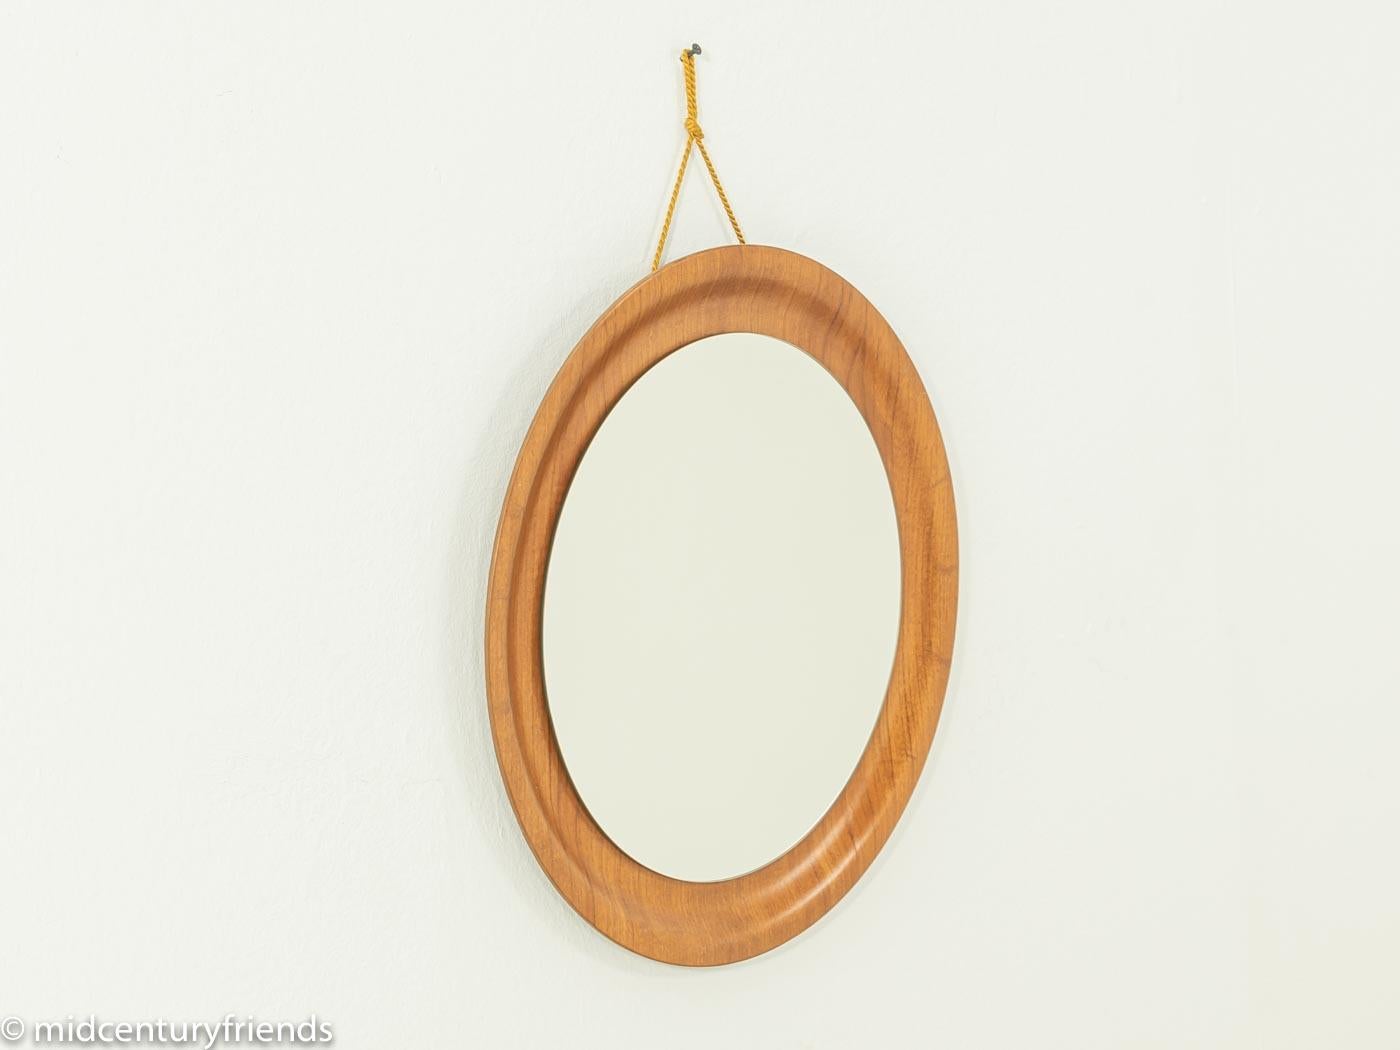 Classic mirror from the 1960s with a teak frame. Made in Germany.